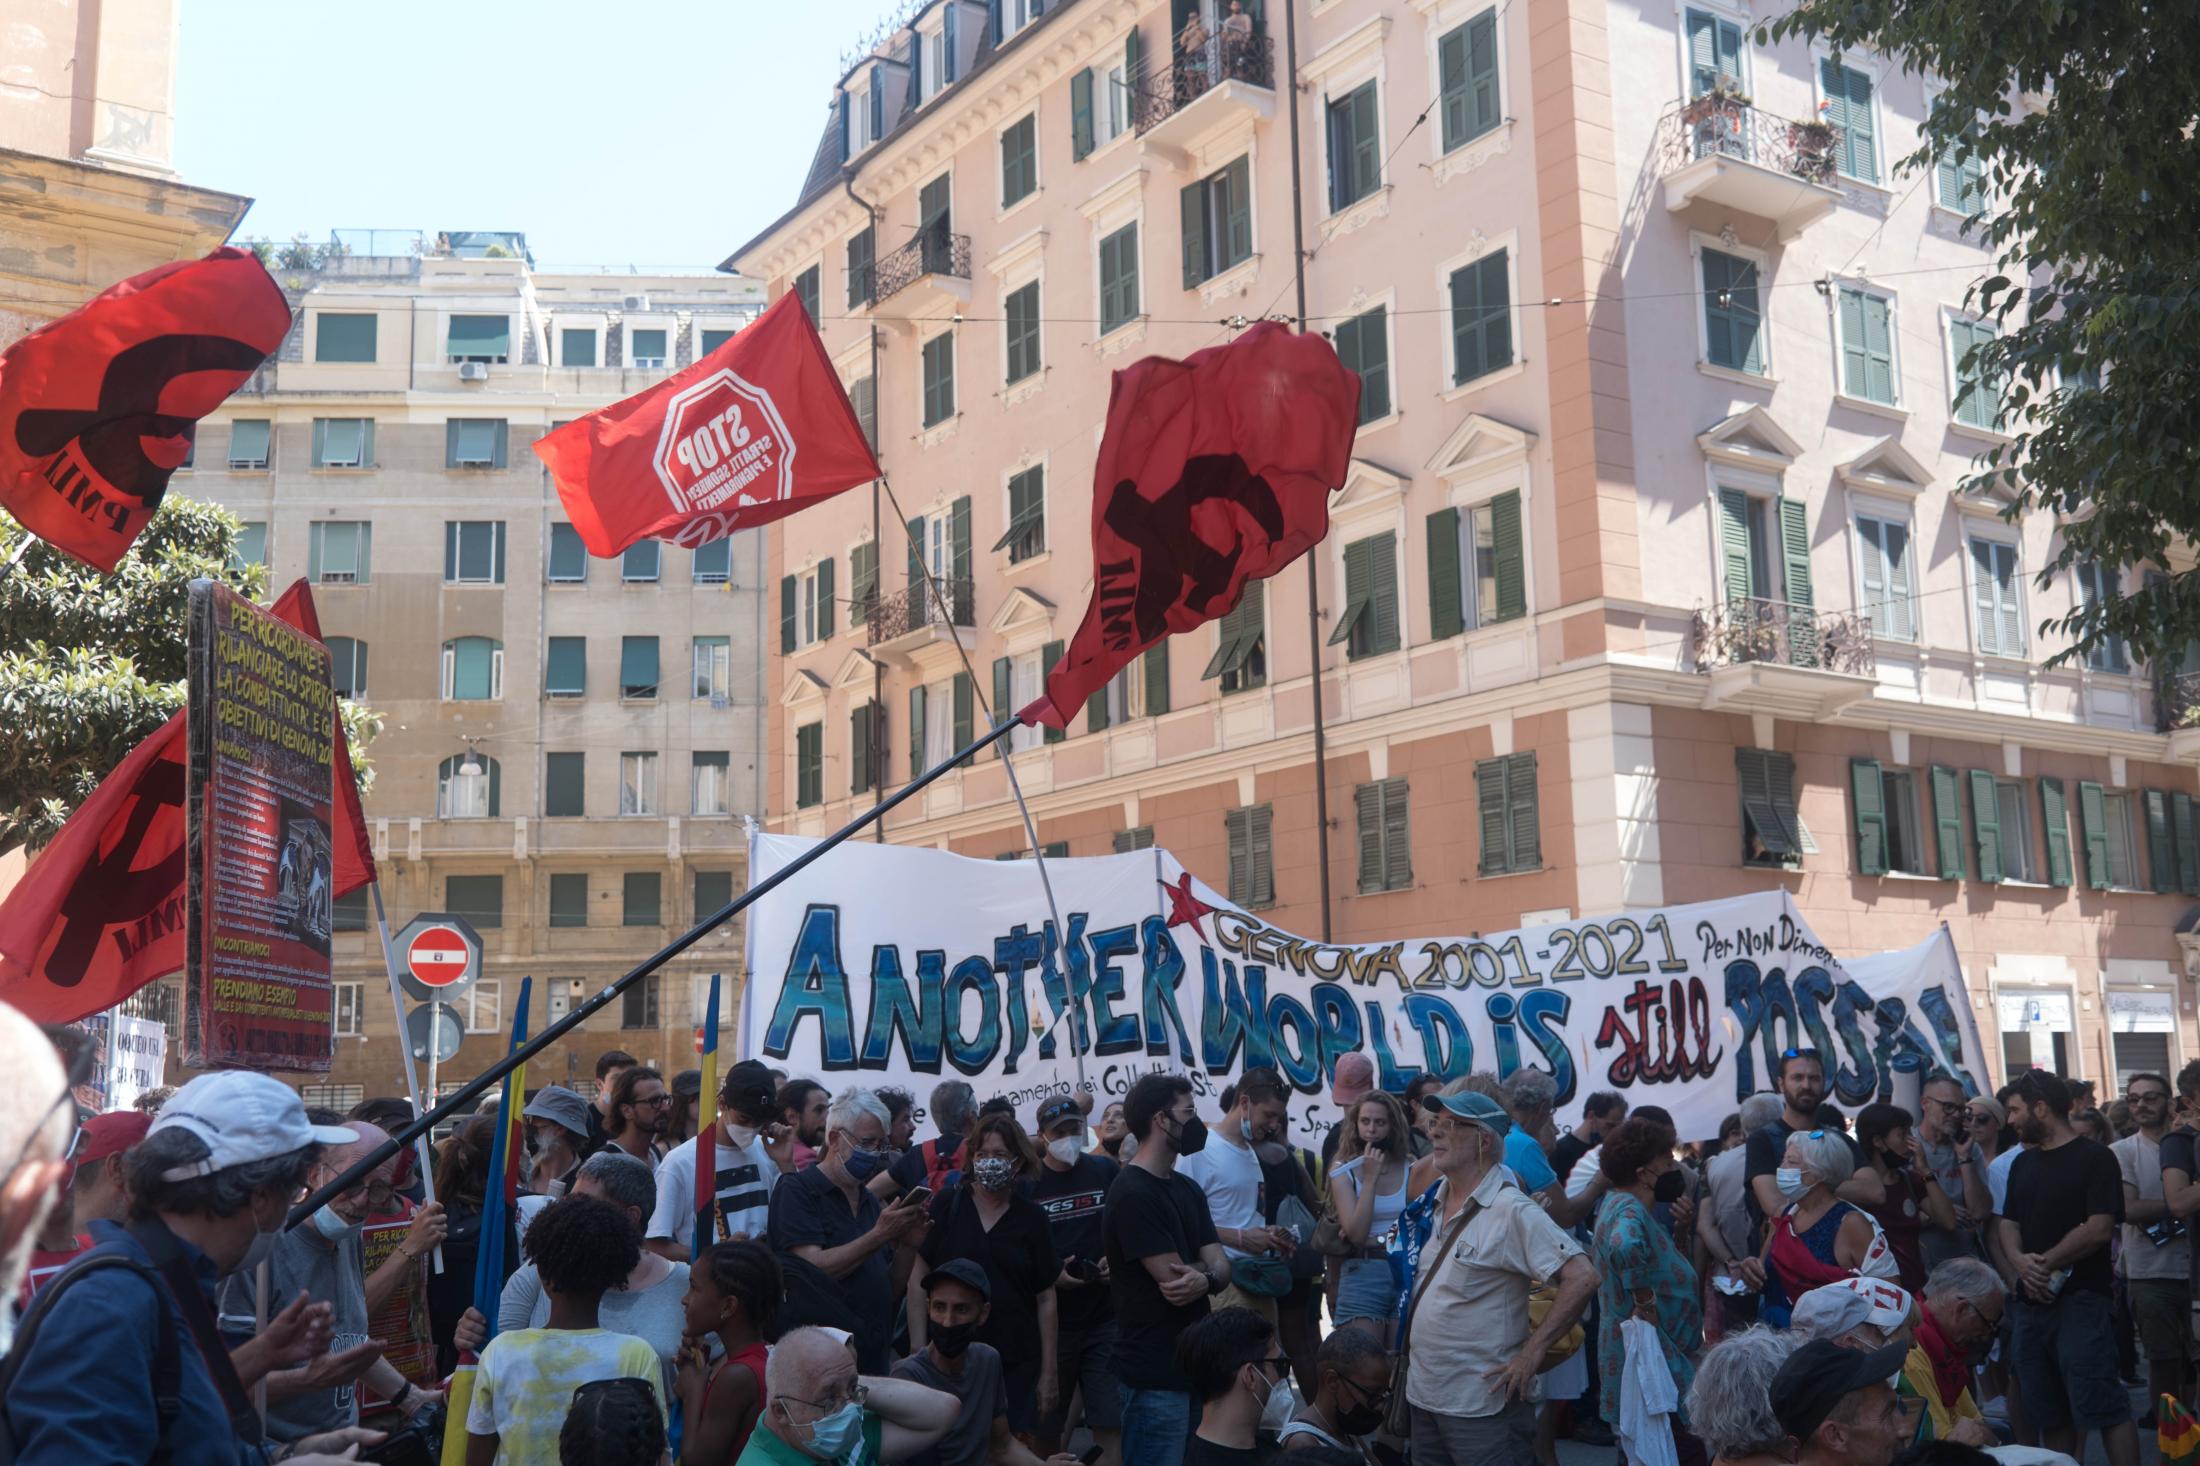 Genova 2001-2021: Another word is still Possible